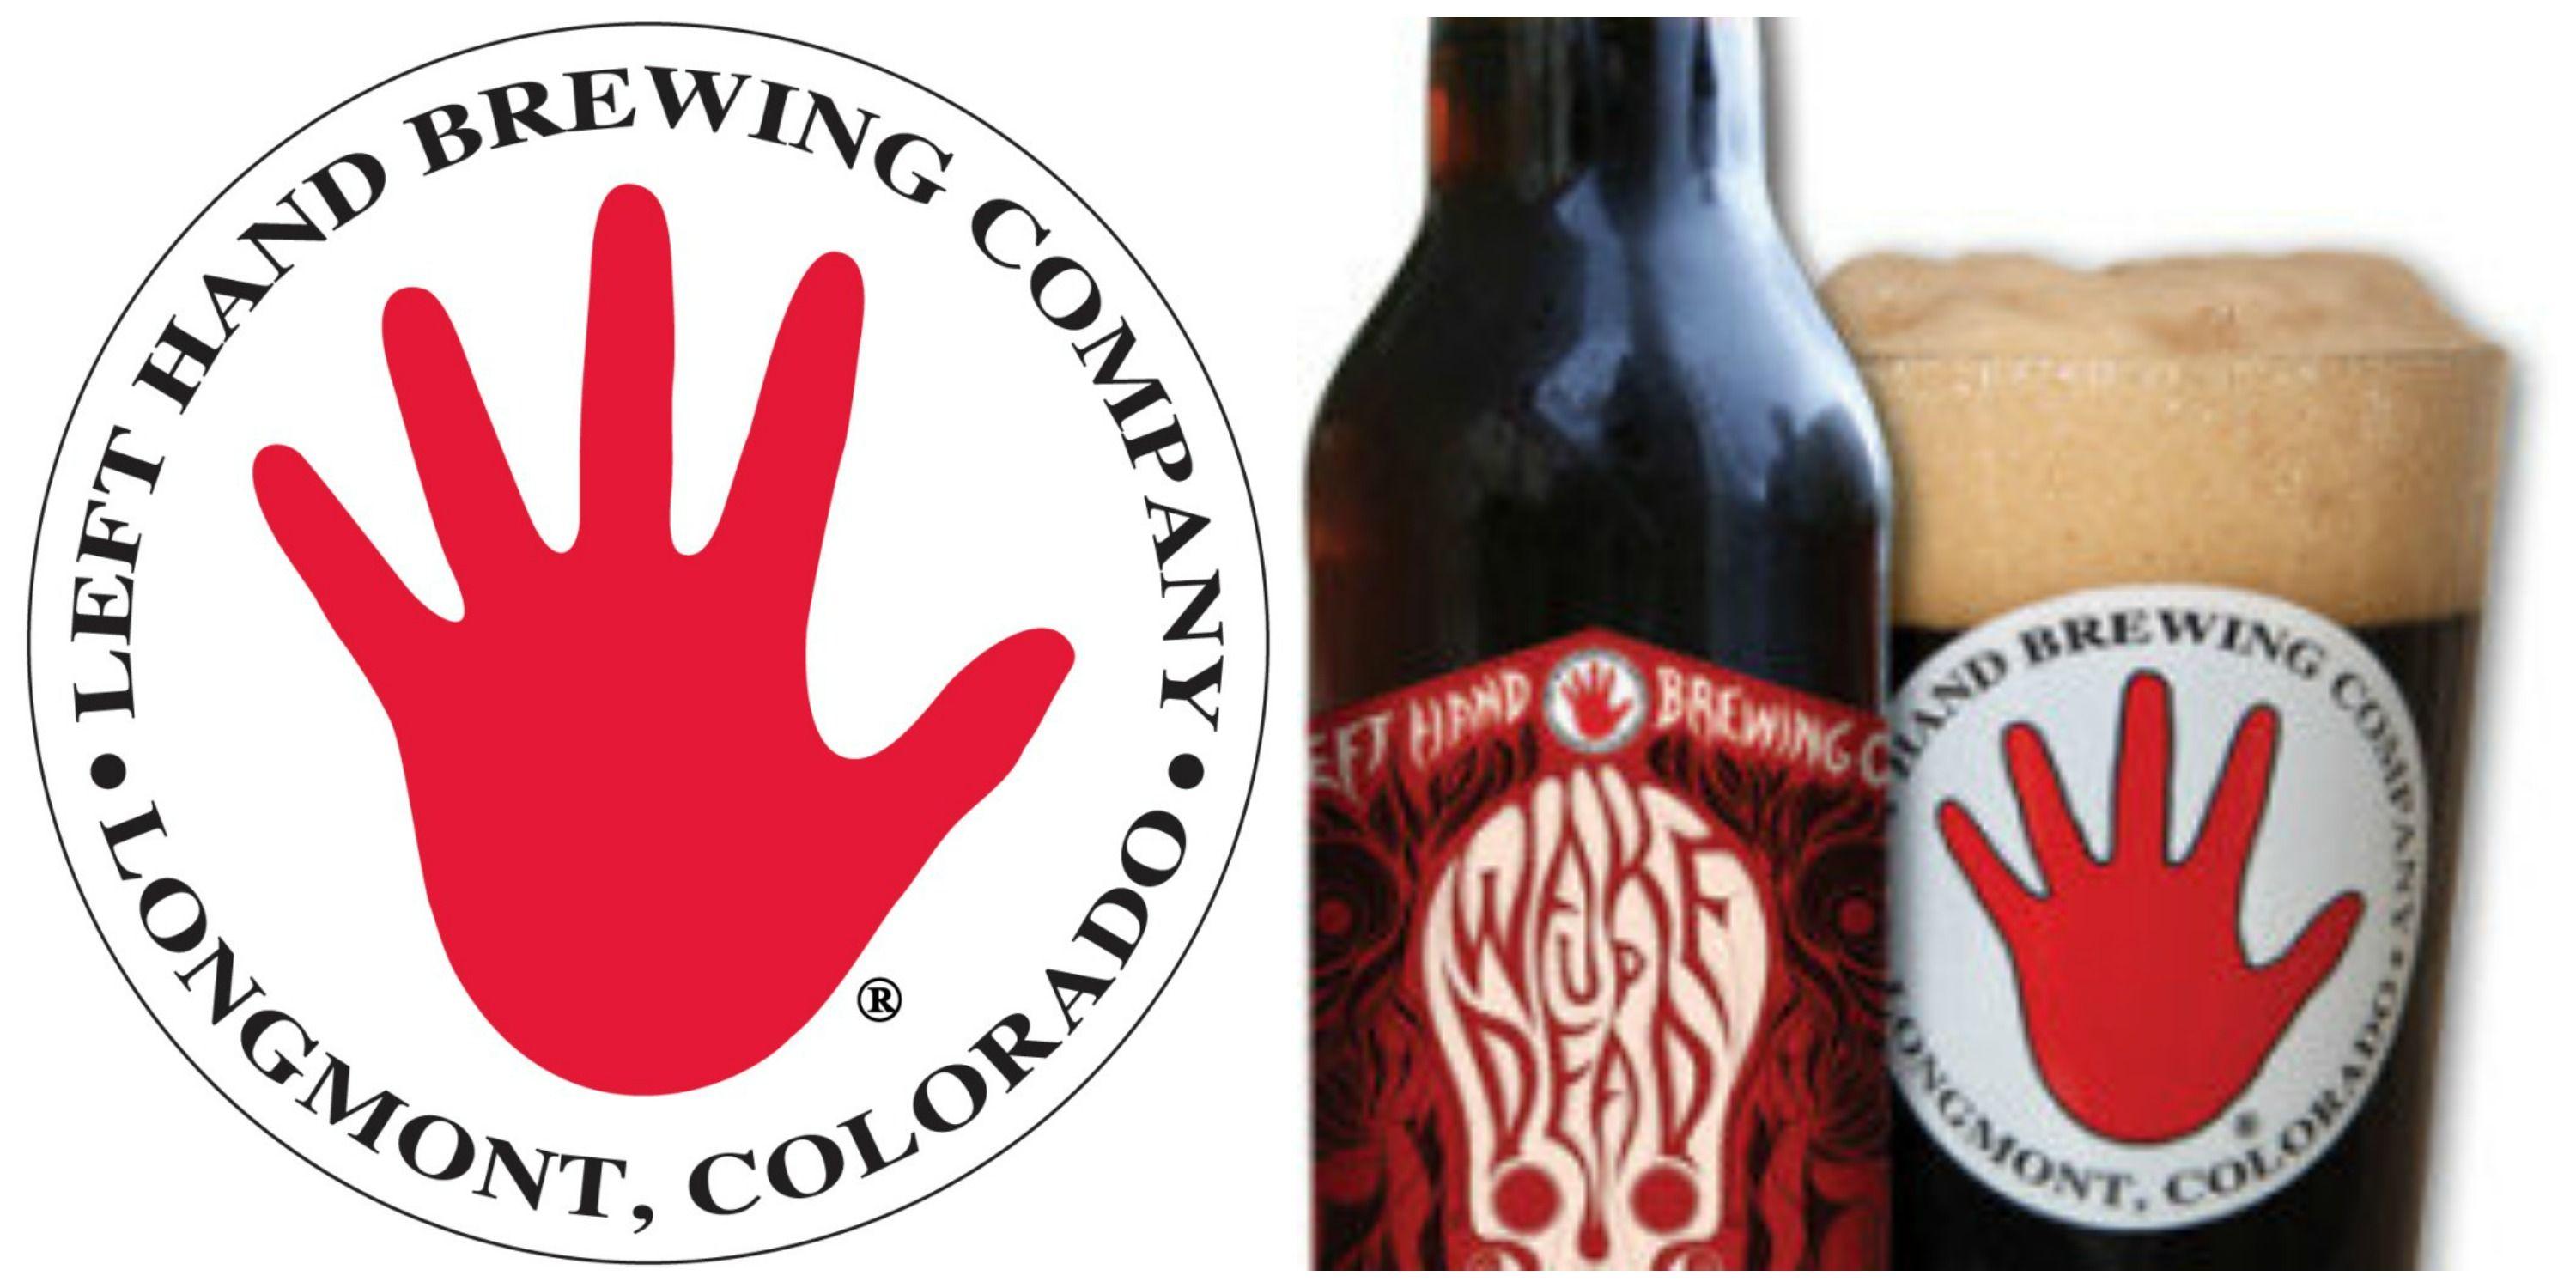 Hand Beer Logo - Wake Up Dead Bottle Service. Thursday, May 8th at 7pm › Sheffields ...